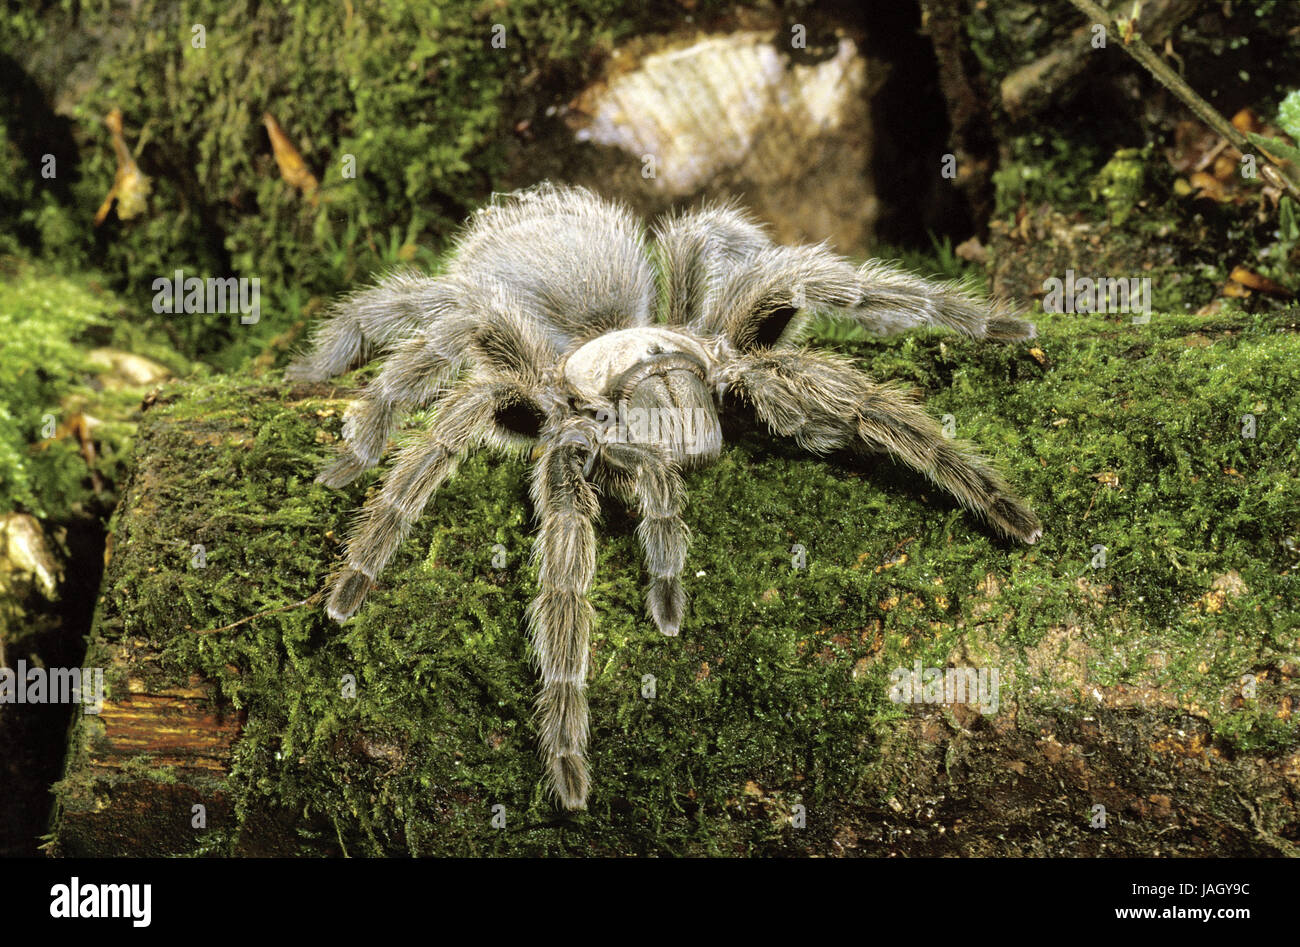 Spider,Theraphosa spec.,South Africa, Stock Photo